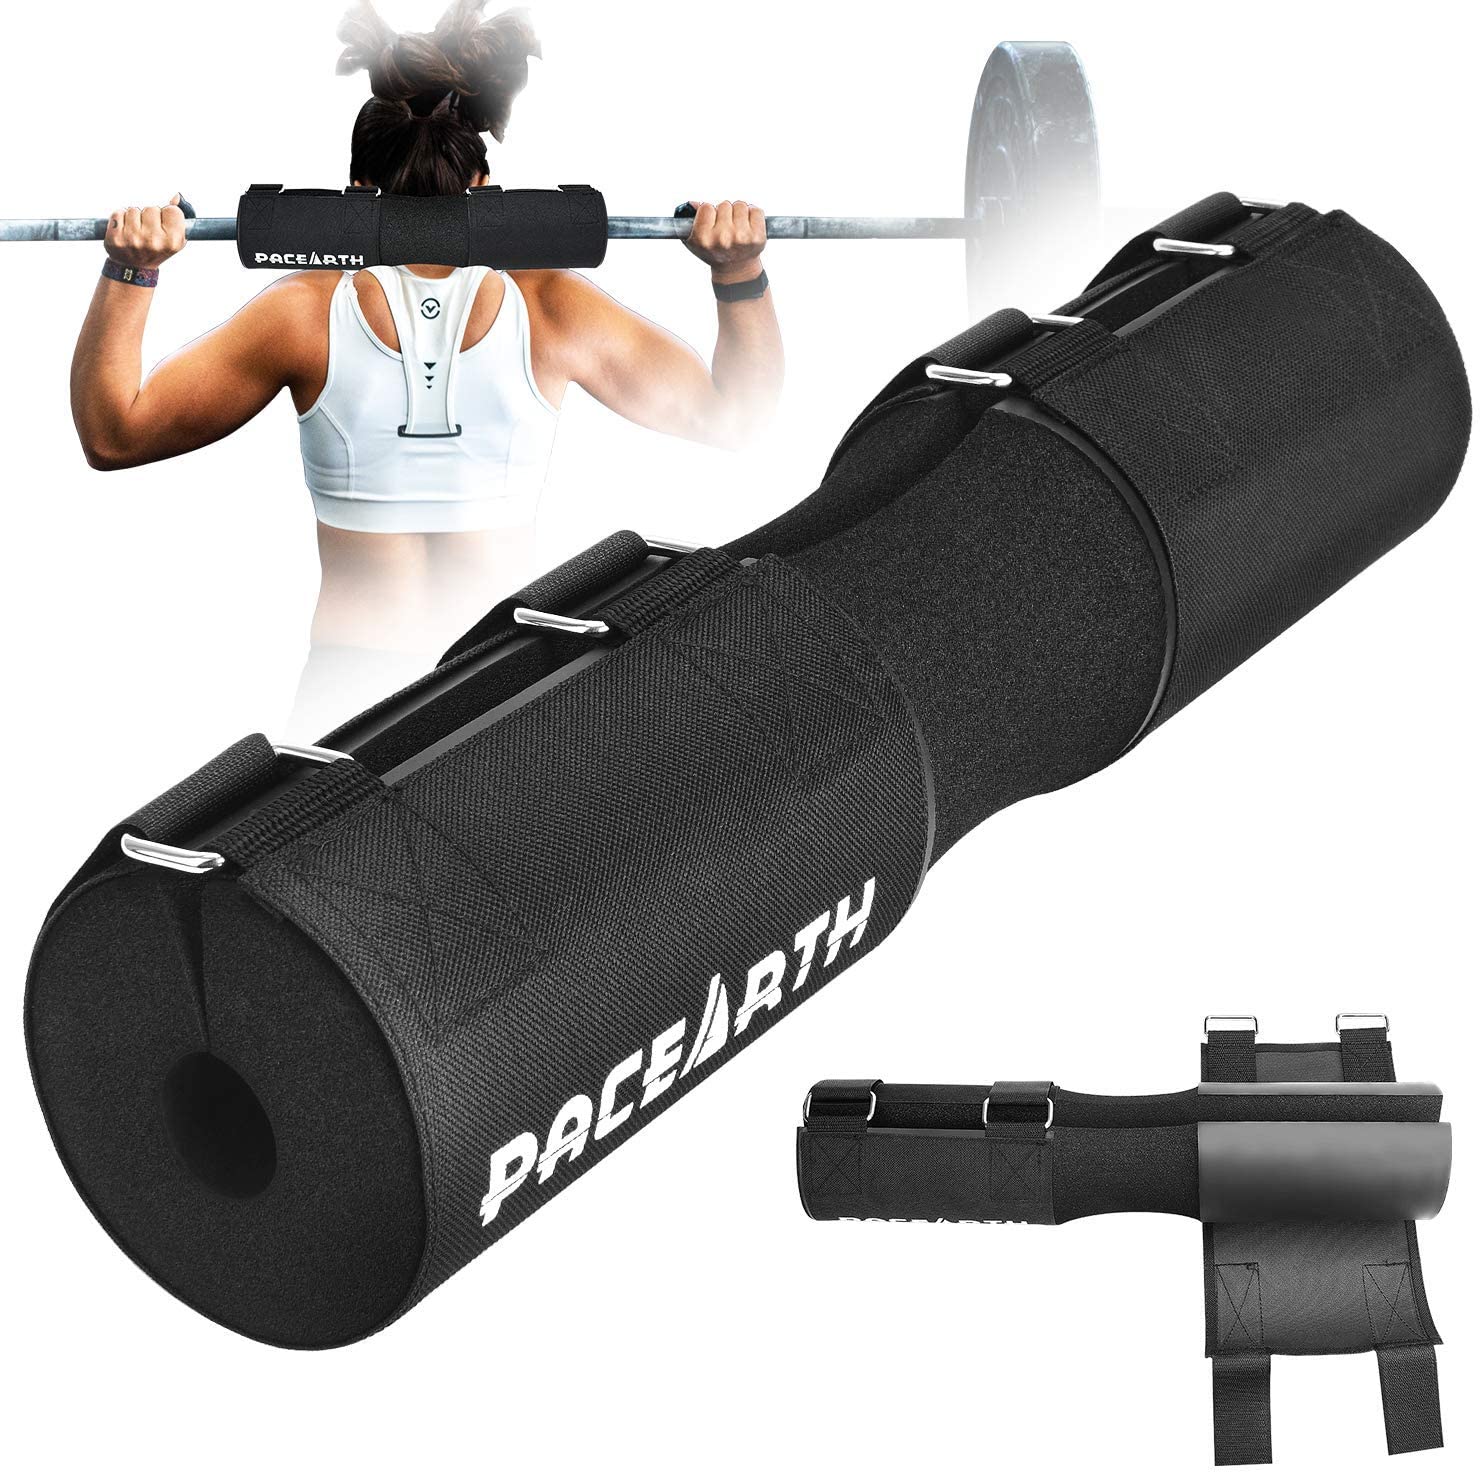  ANERTE Barbell Pad Squat Pad for Lunges and Squats